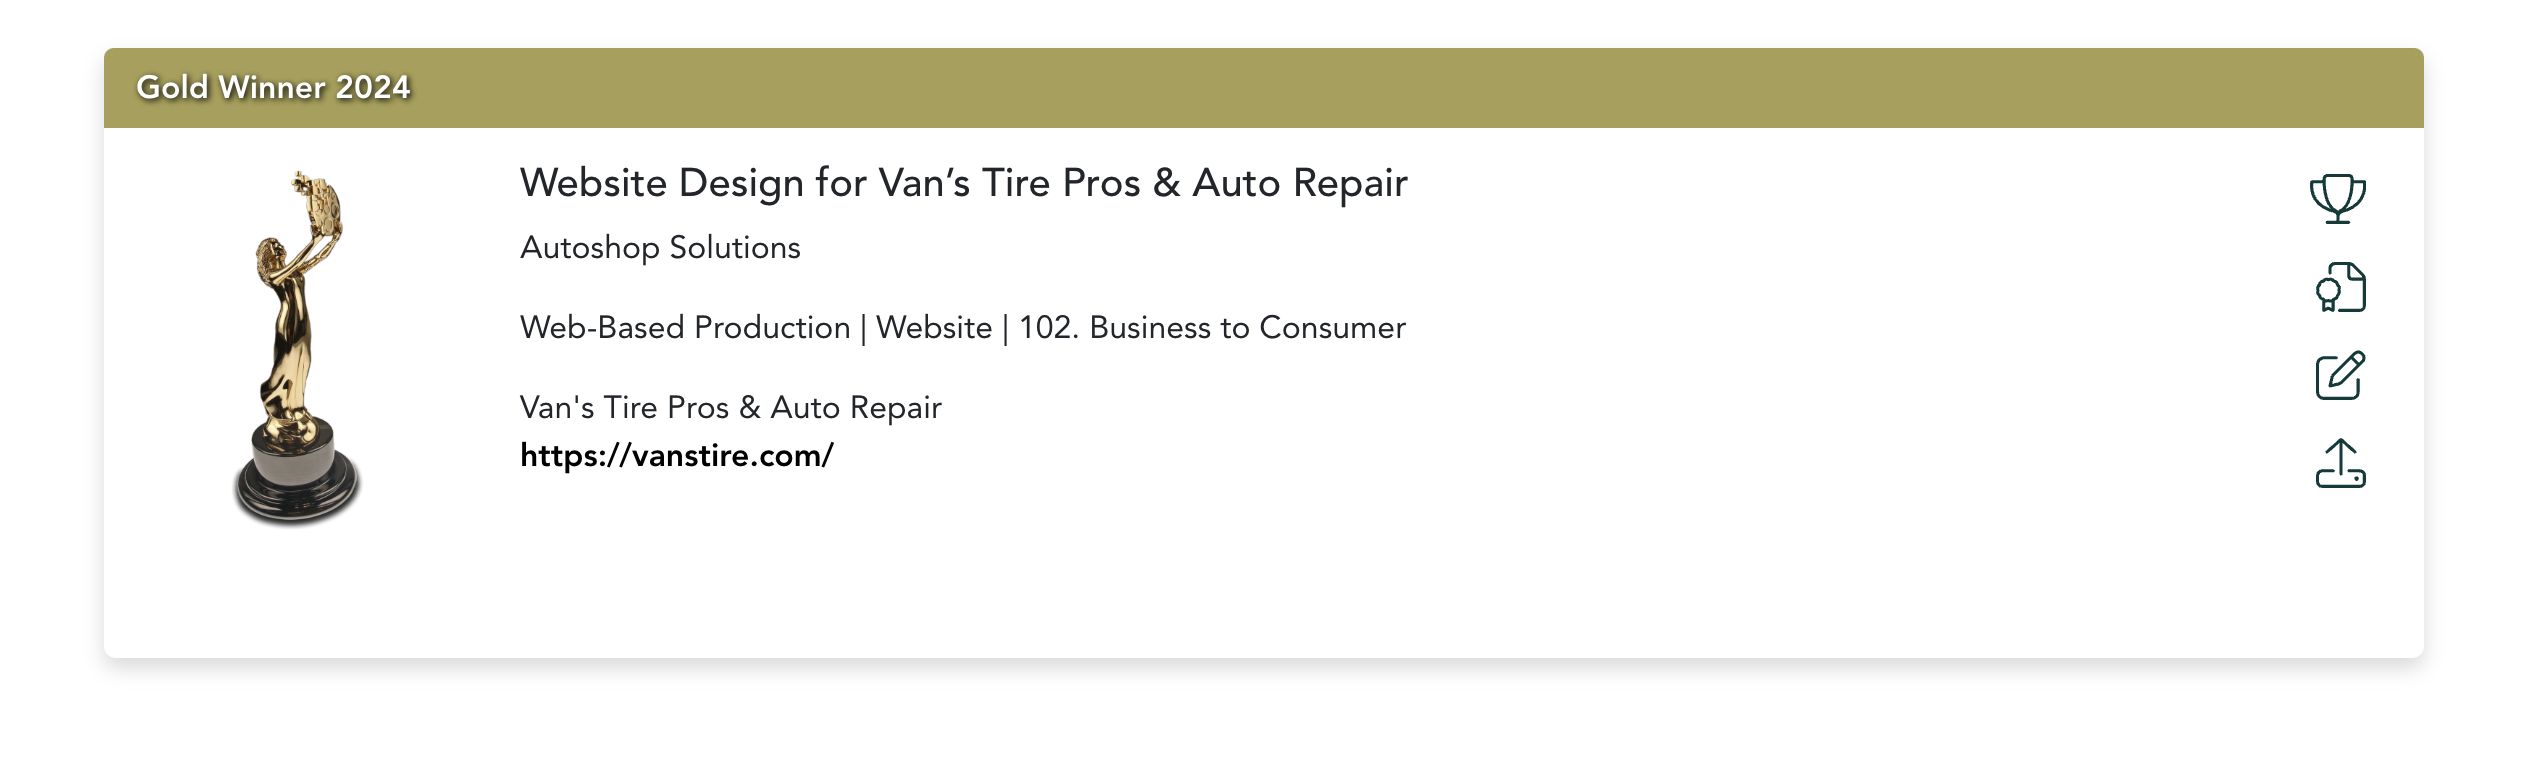 Autoshop Solutions Wins Gold AVA Award For Website Design</br>Of Van's Tire Pros & Auto Repair!